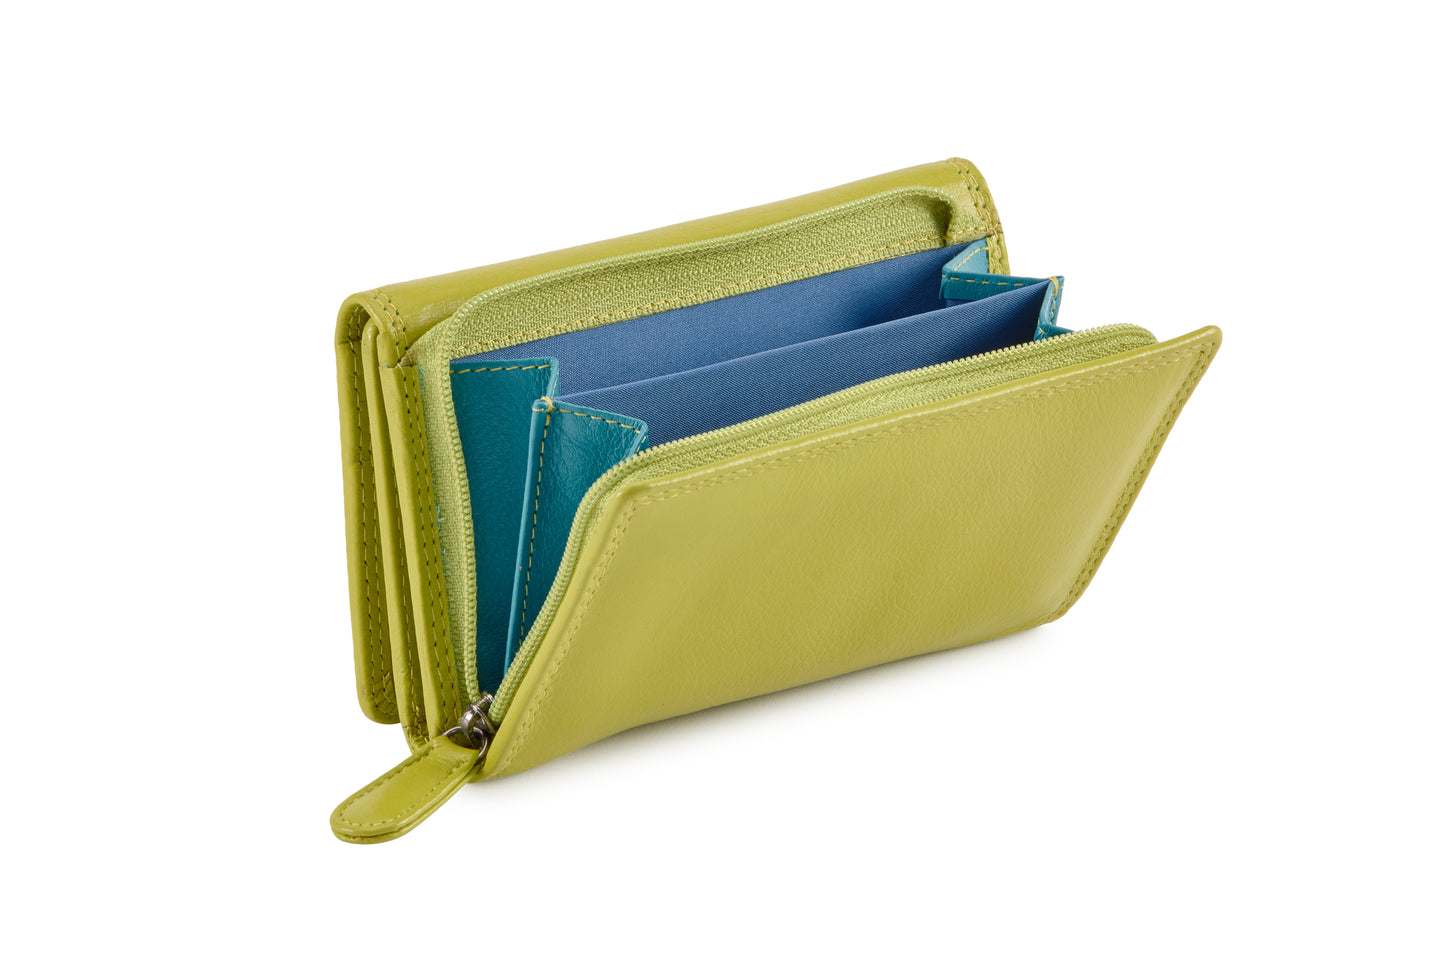 Calfnero Genuine Leather Women's Wallet (6086-Lime-Green)